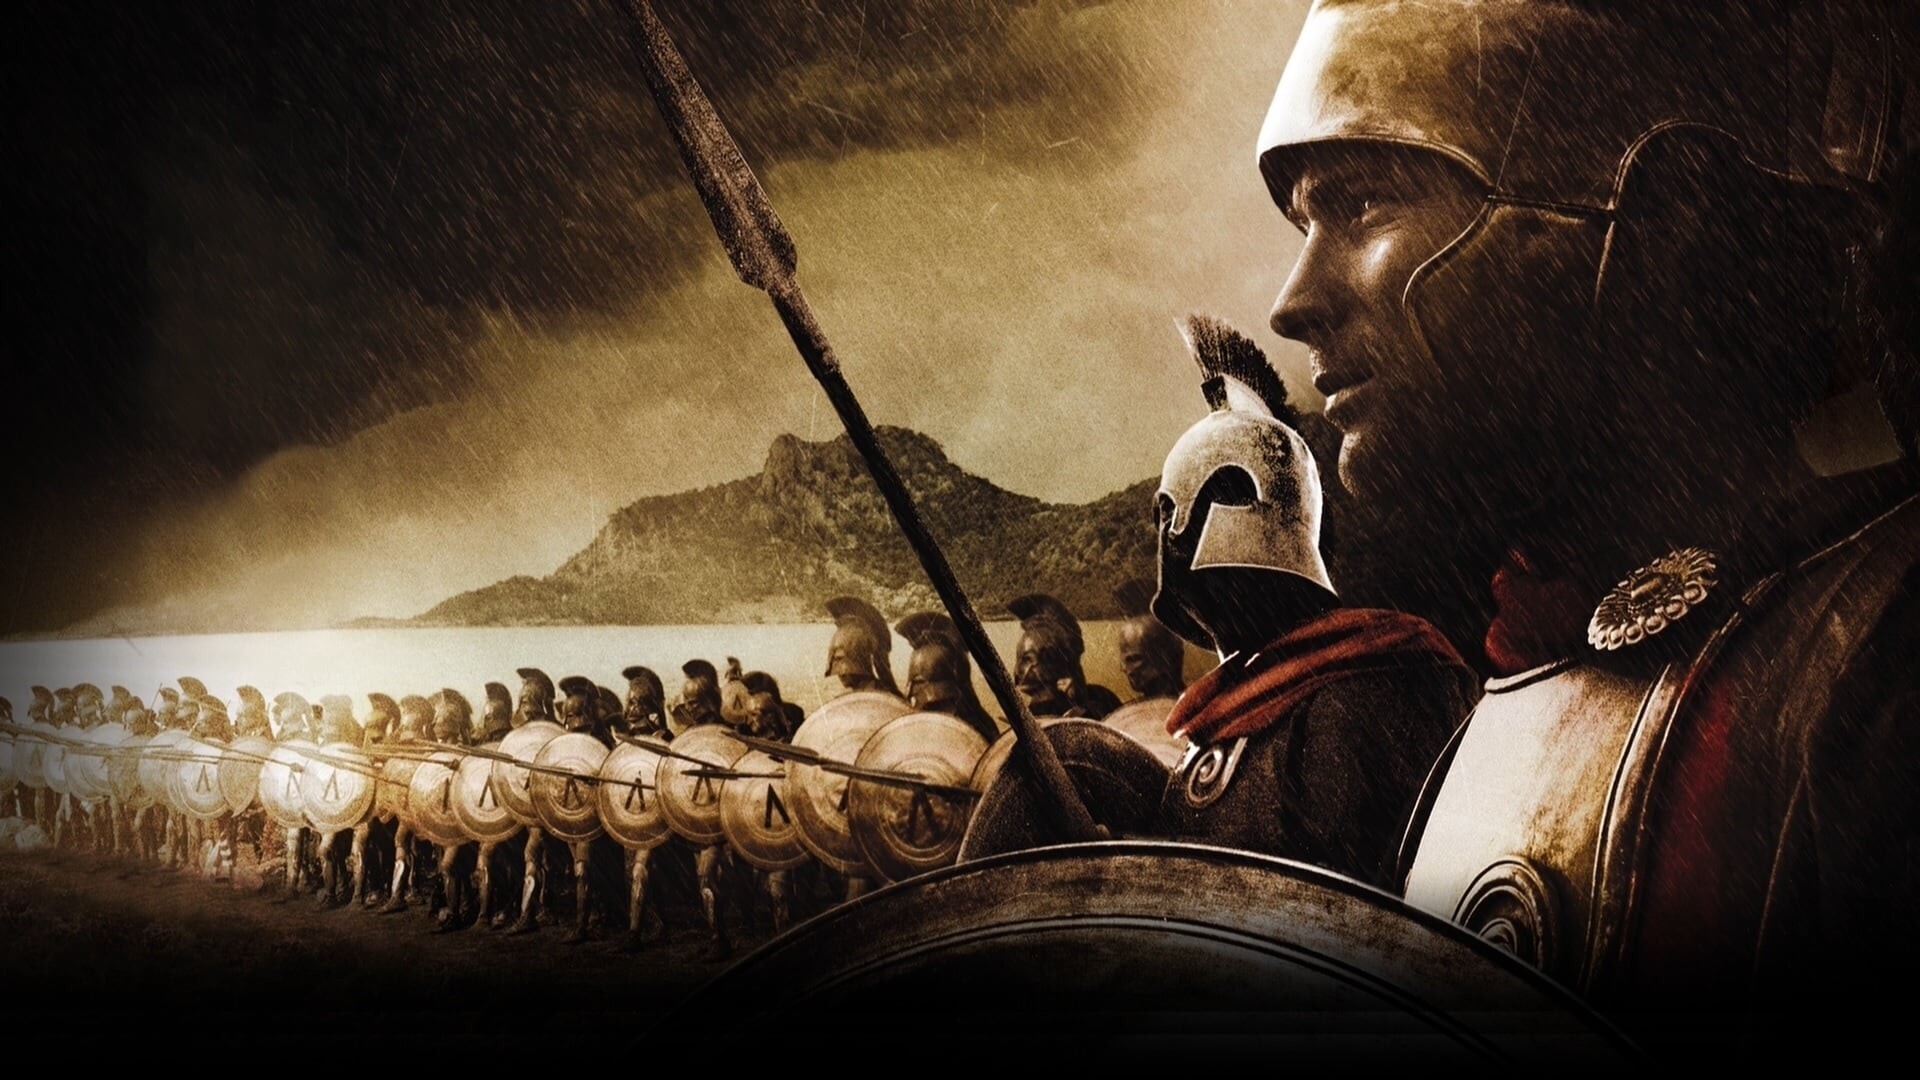 Sparta: 300, An American epic historical action movie filmed mostly with a special comic book technique, Myths. 1920x1080 Full HD Wallpaper.